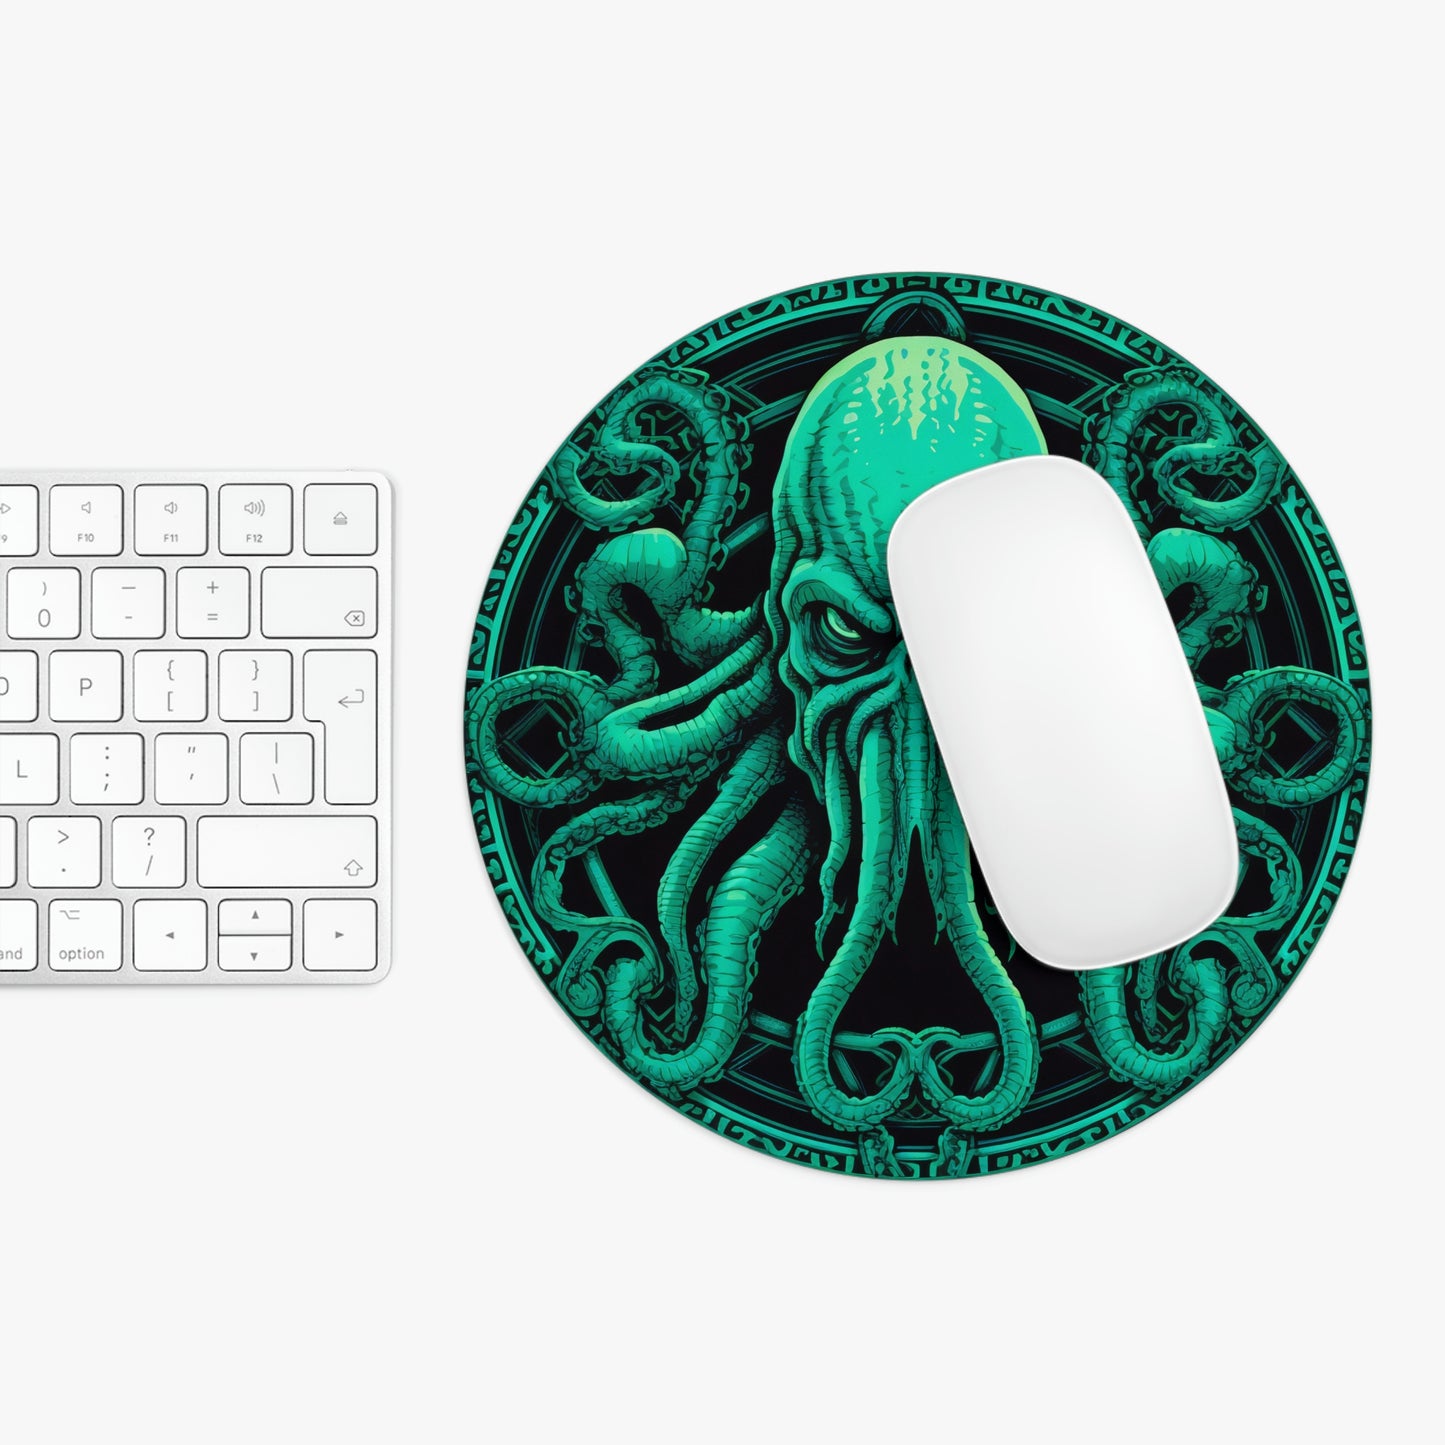 Cthulhu Mouse Pad, Lovecraft Mouse Pad, Horror Mouse Pad, 8" Round Mouse Pad, Gaming Mouse Pad, Work Mouse Pad, Non-slip Mouse Pad